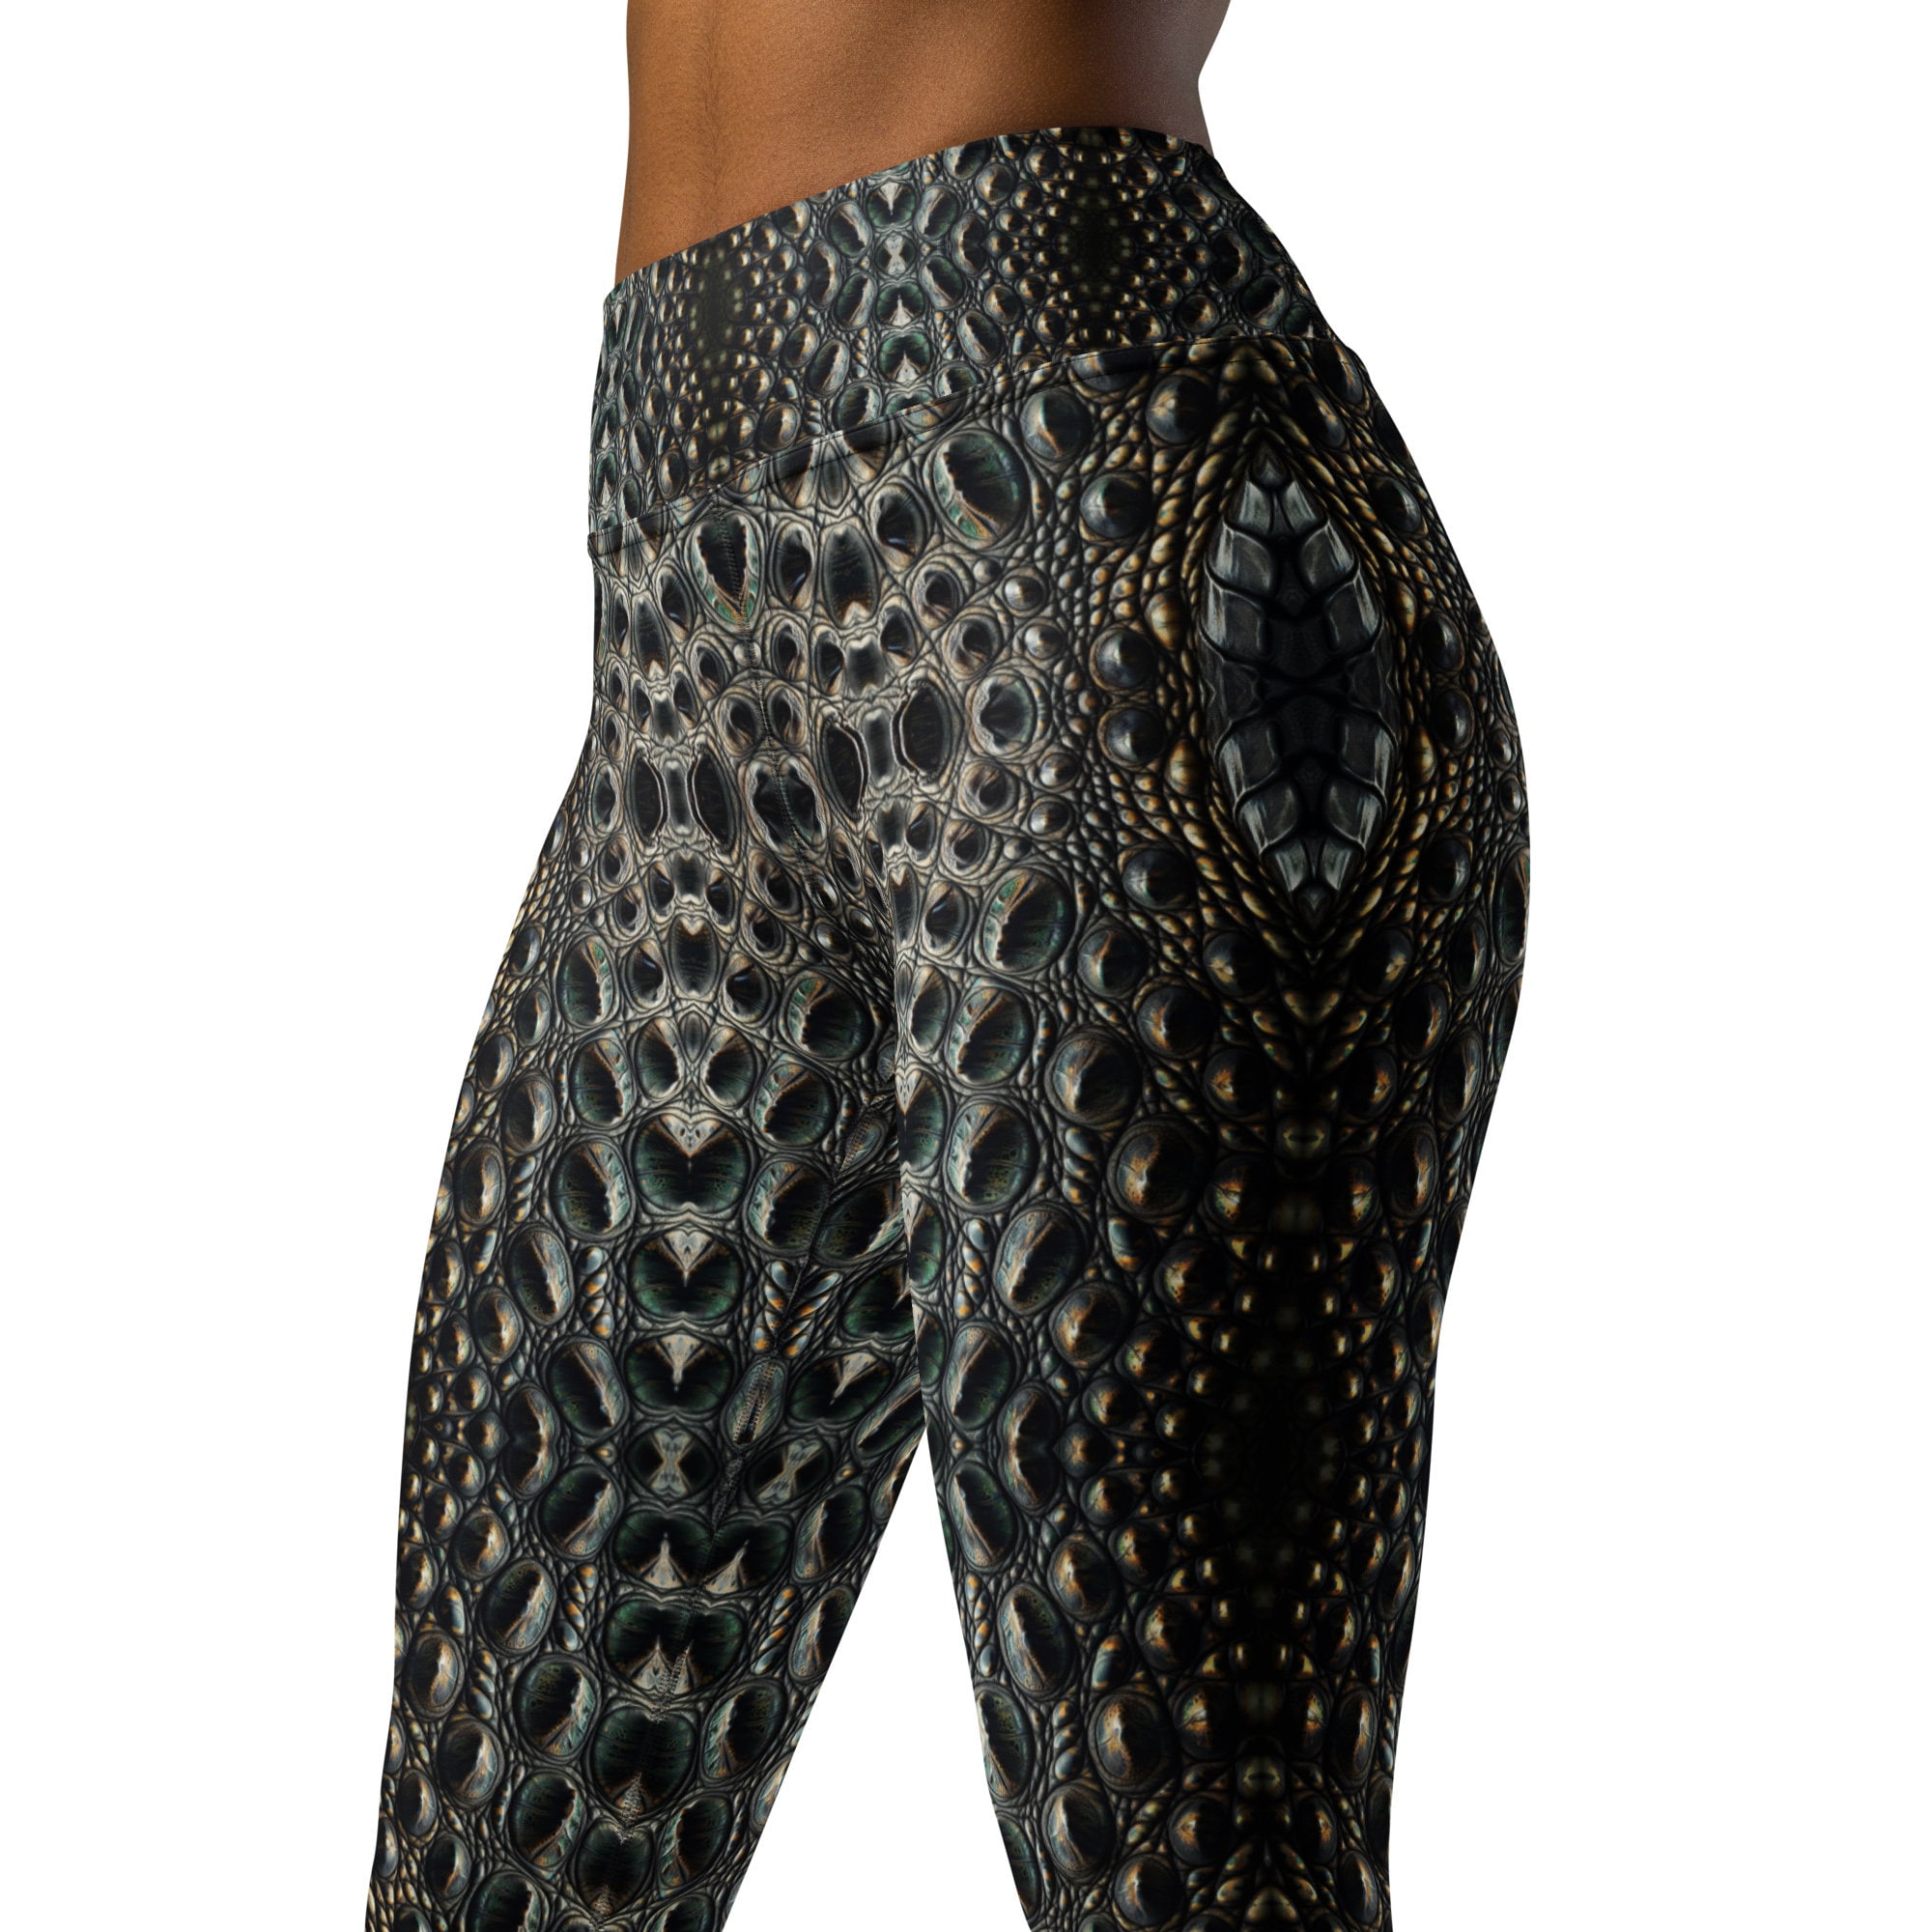 LEGGINGS With an Abstract Alligator Pattern Unisex Black-gray-beige 